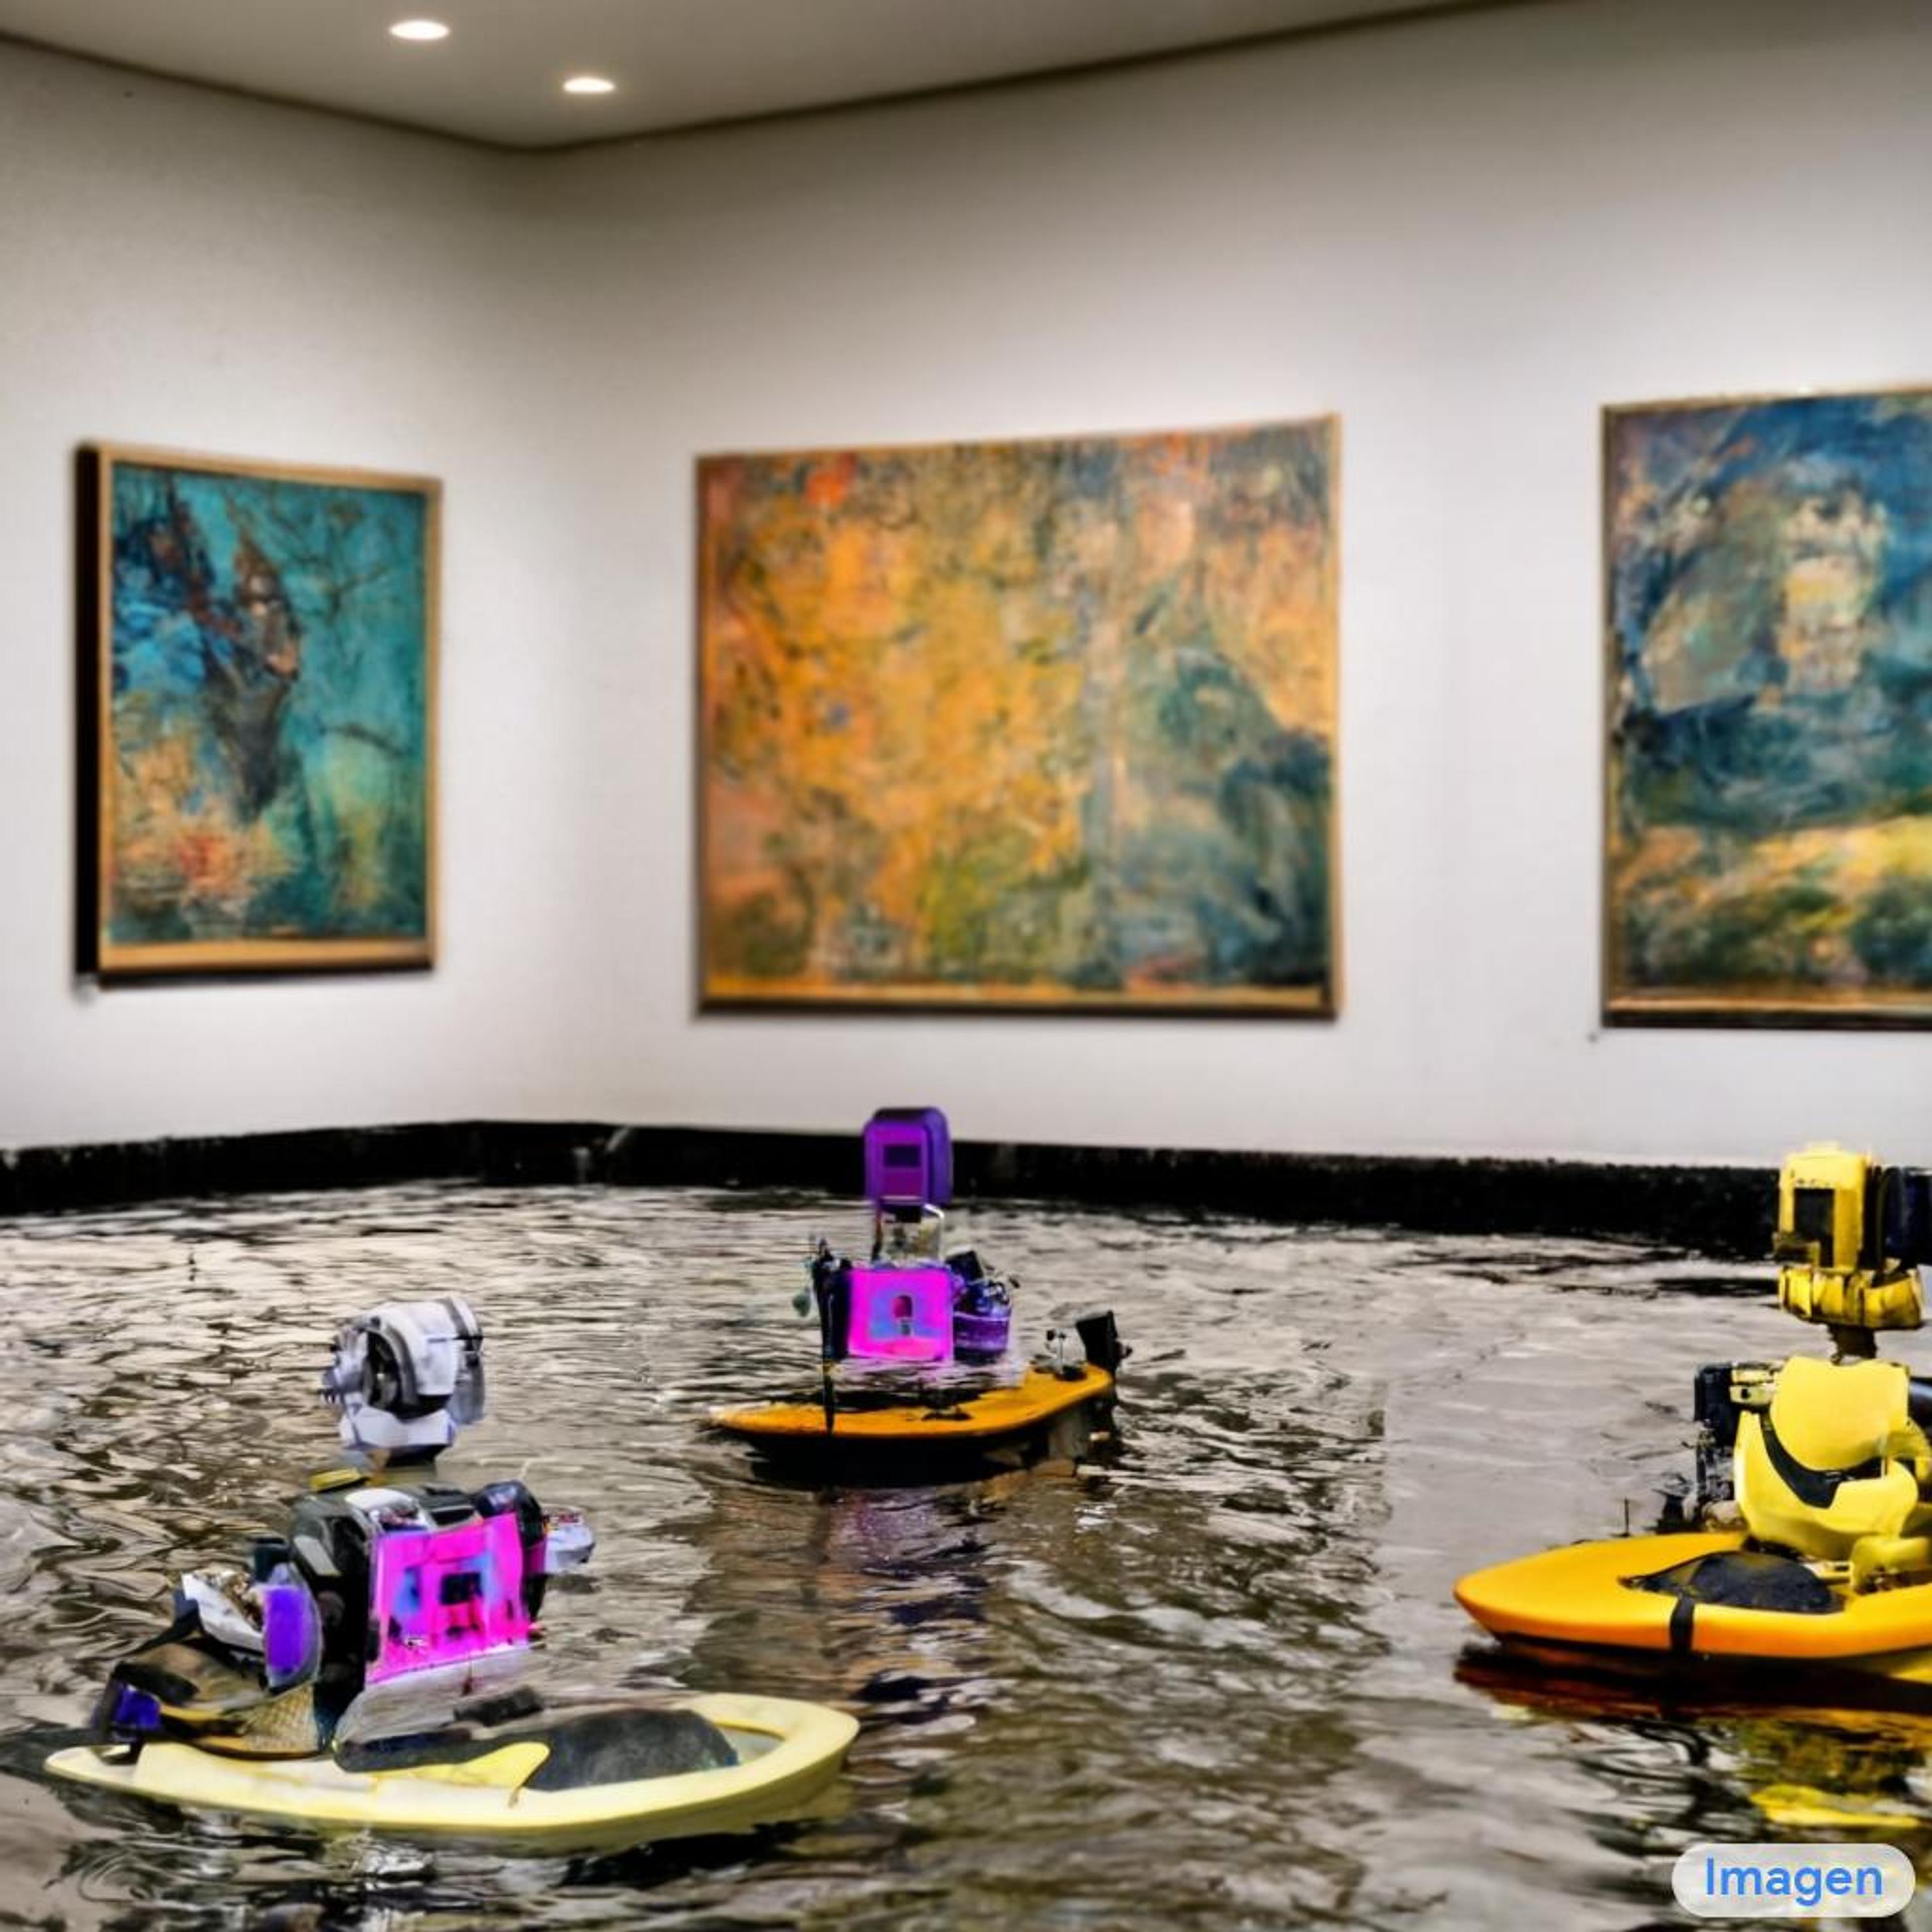 "An art gallery displaying Monet paintings. The art gallery is flooded. Robots are going around the art gallery using paddle boards" Rendered by Google Imagen, 2022